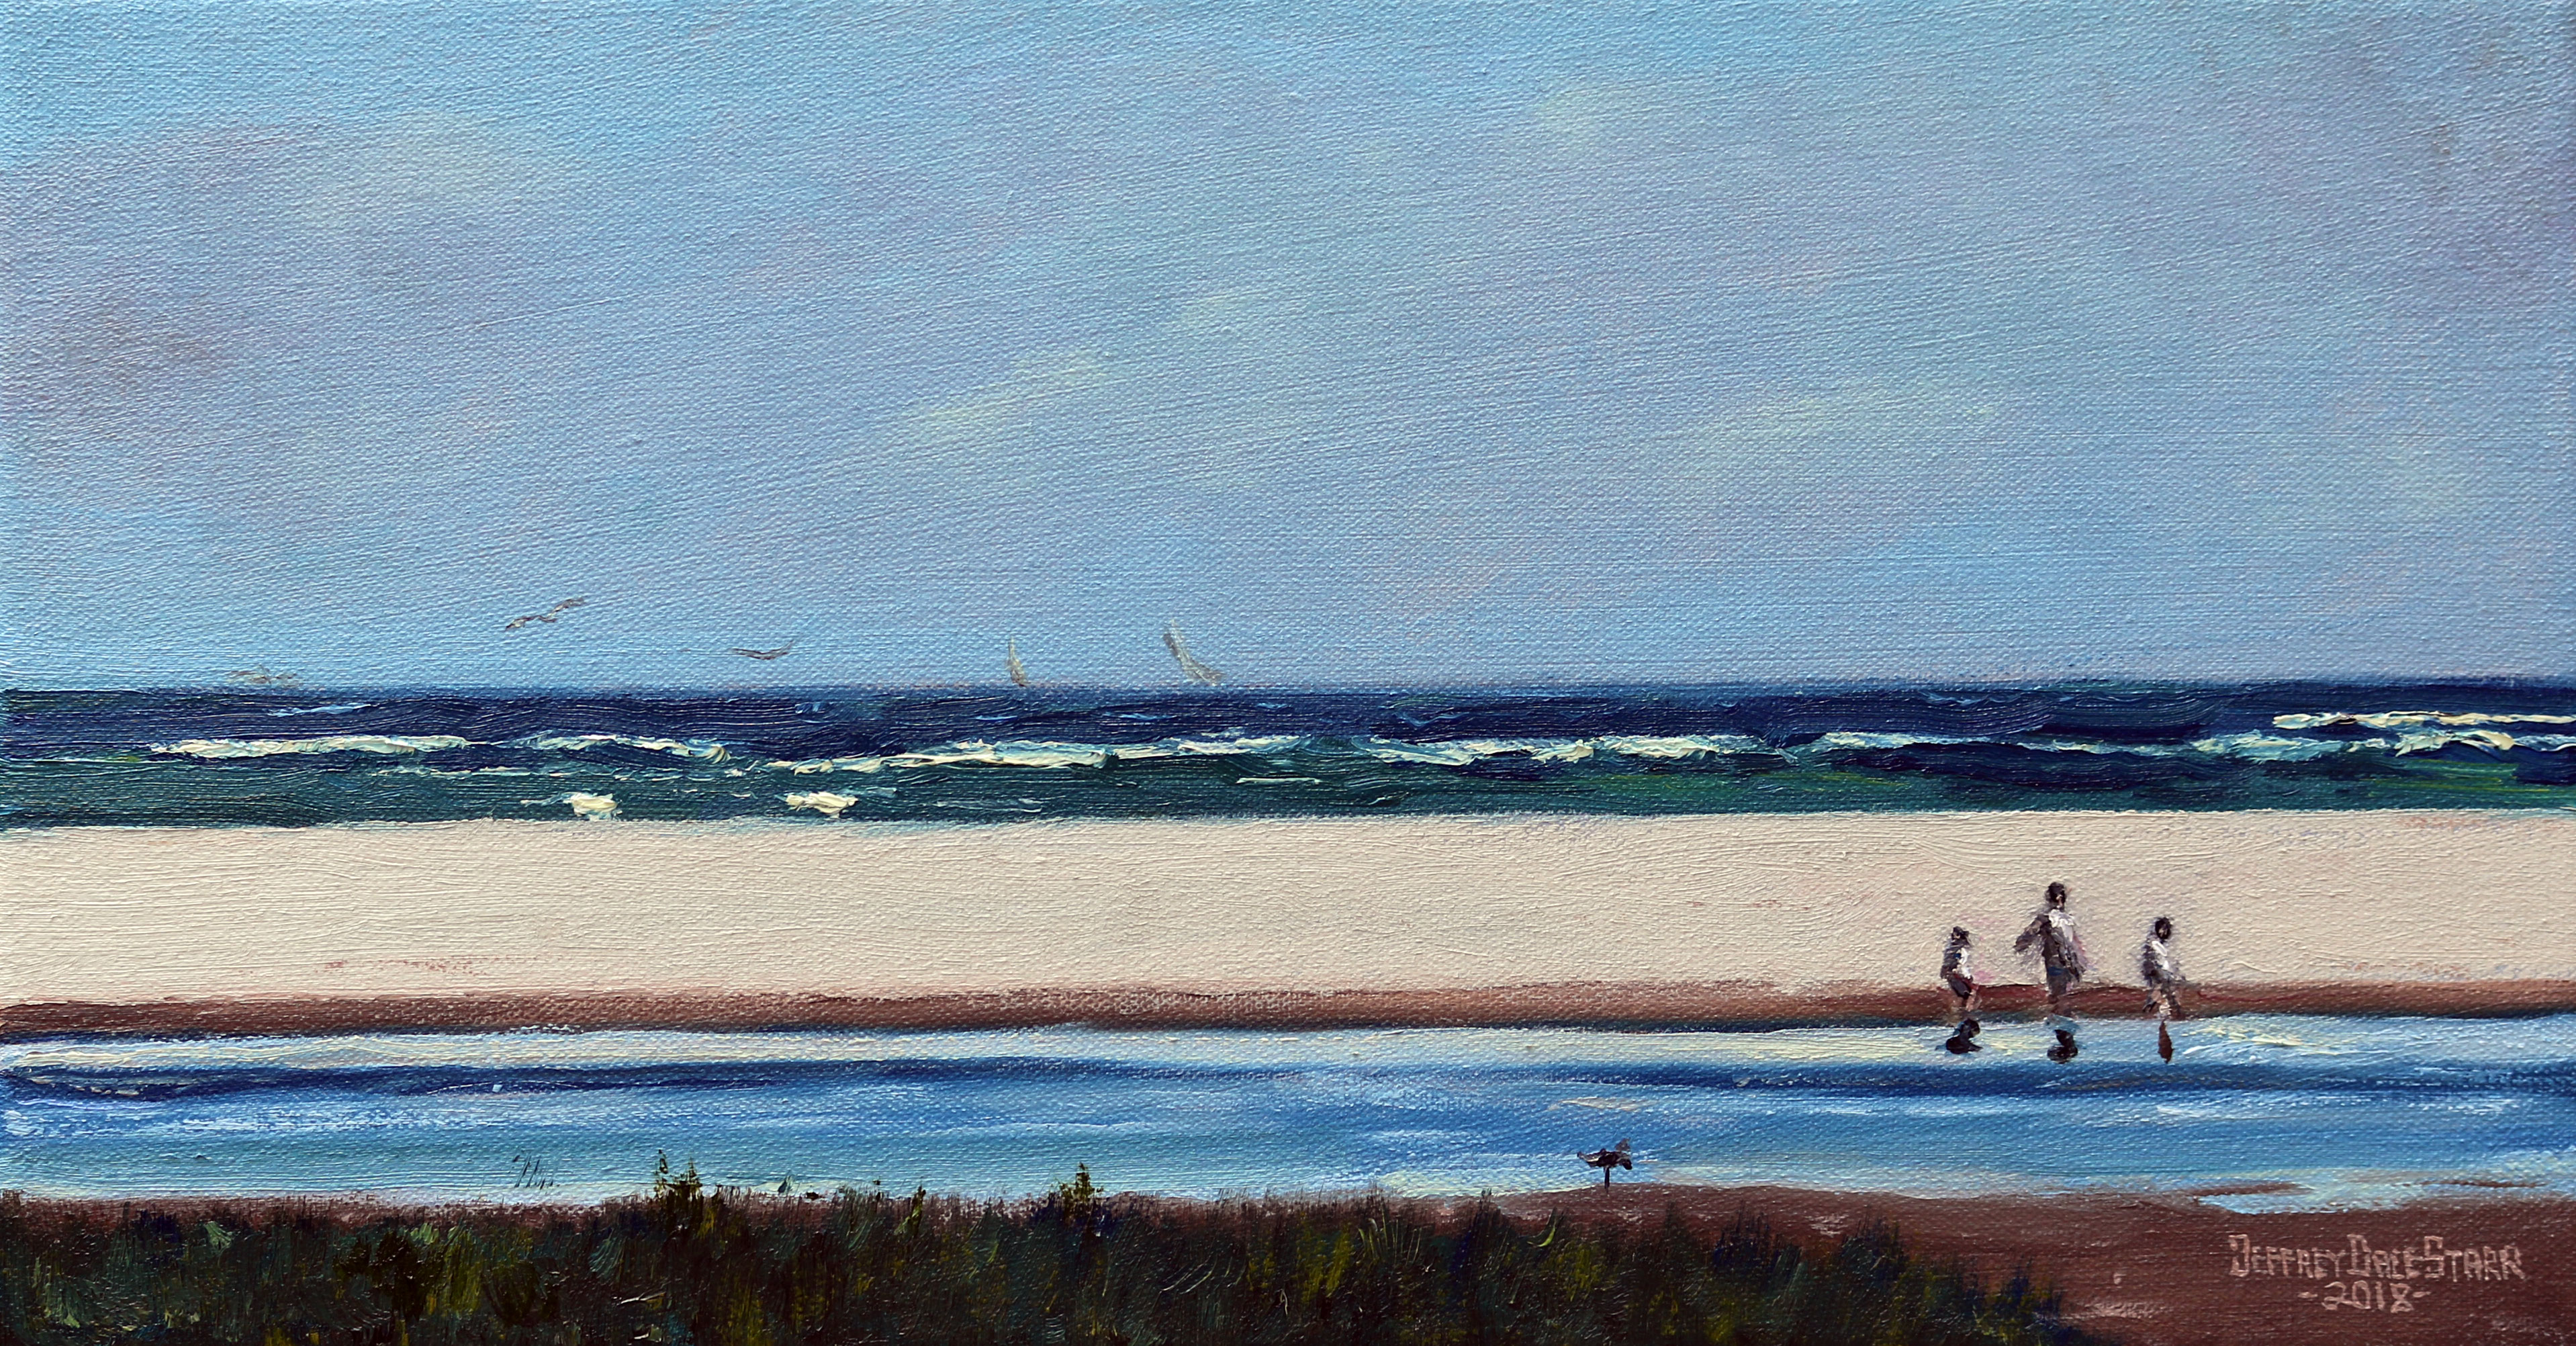 Oil painting "Breezy Afternoon on Cape Cod" by Jeffrey Dale Starr